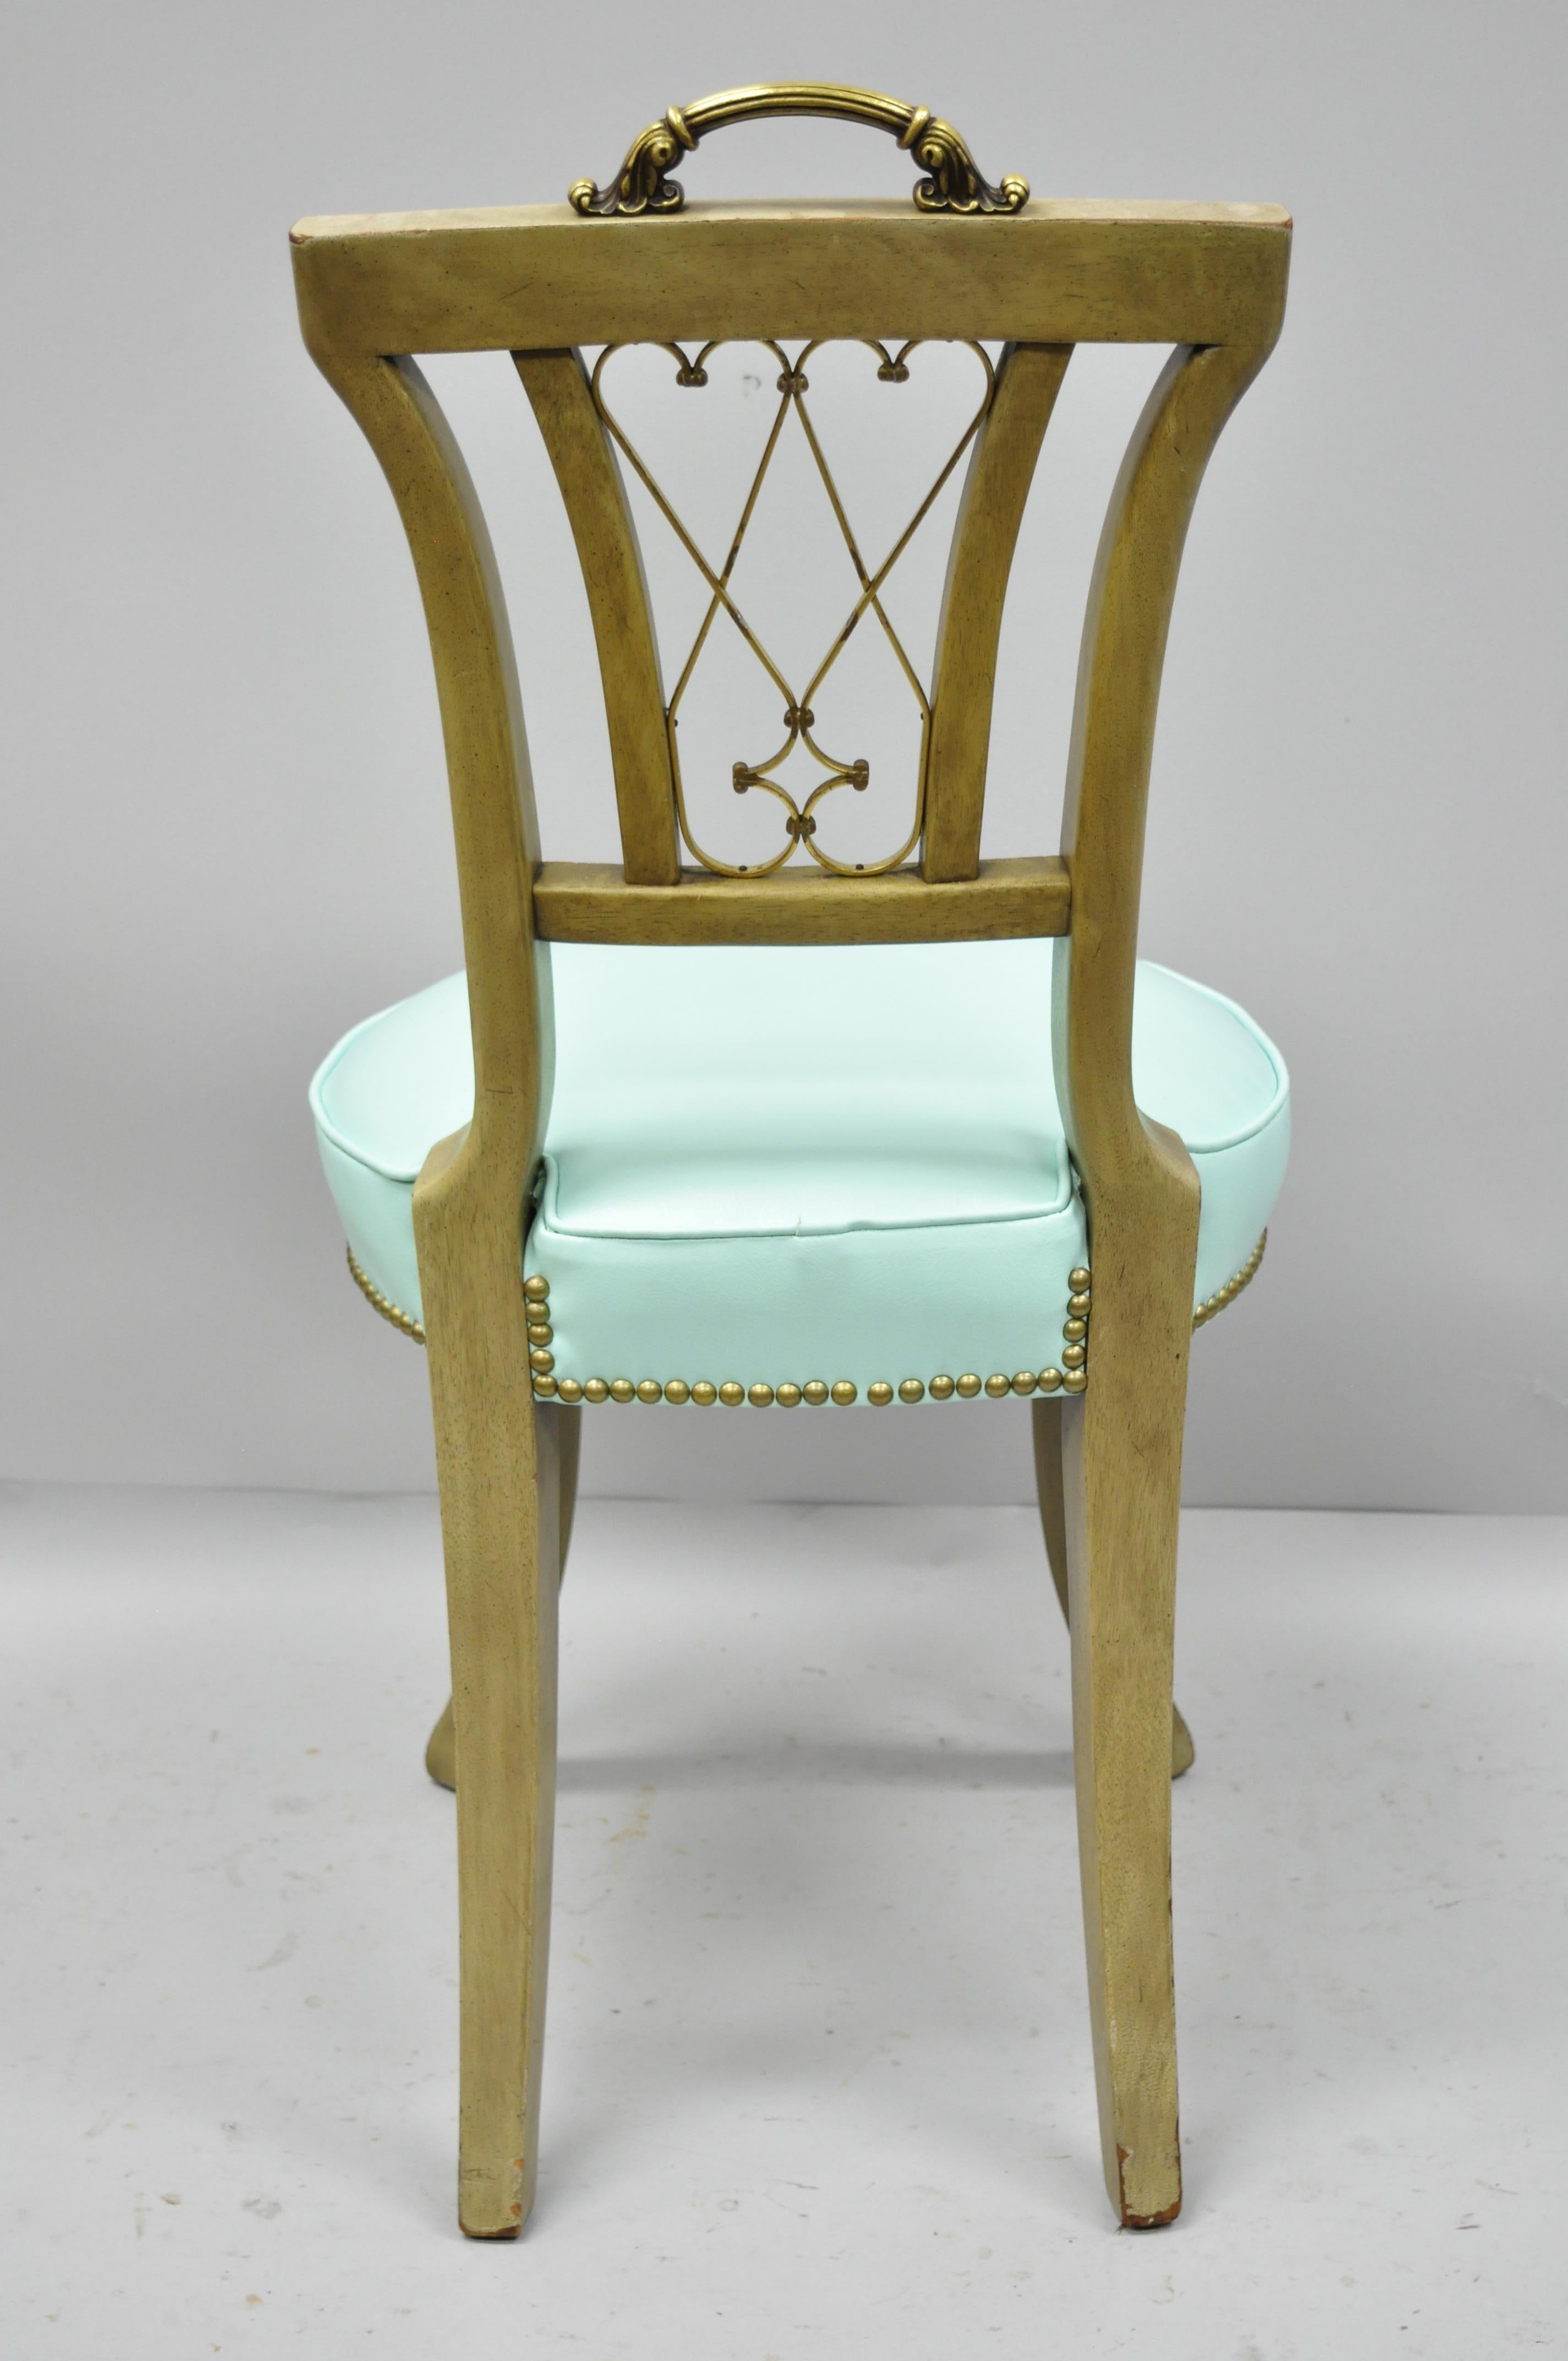 Mid-20th Century Carved Mahogany French Regency Style Chairs with Brass Handle & Aqua Vinyl ‘A’ For Sale